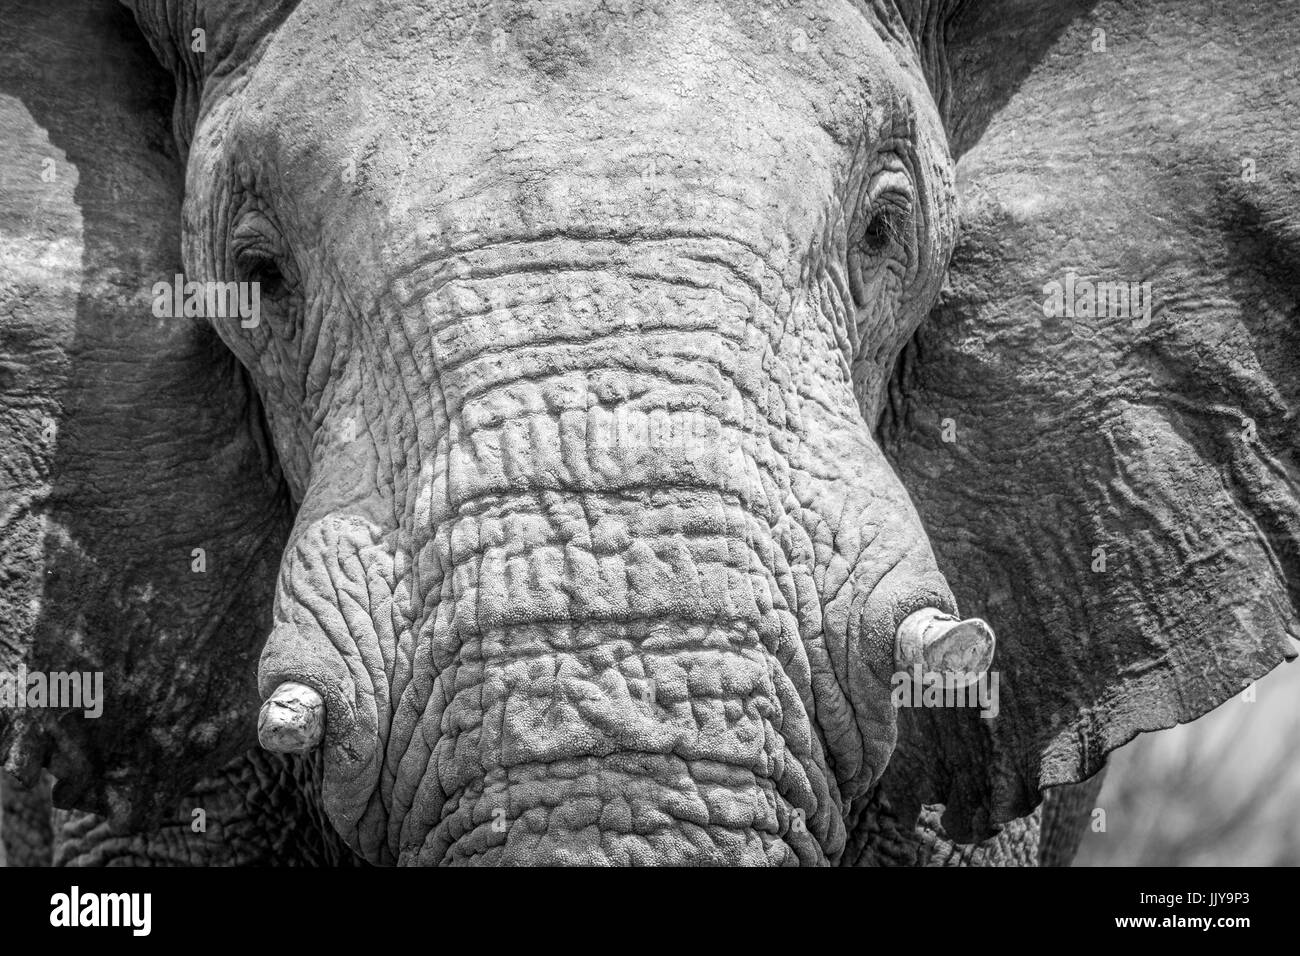 Close up view of an elephant at Etosha National Park, located in Namibia, Africa. Stock Photo